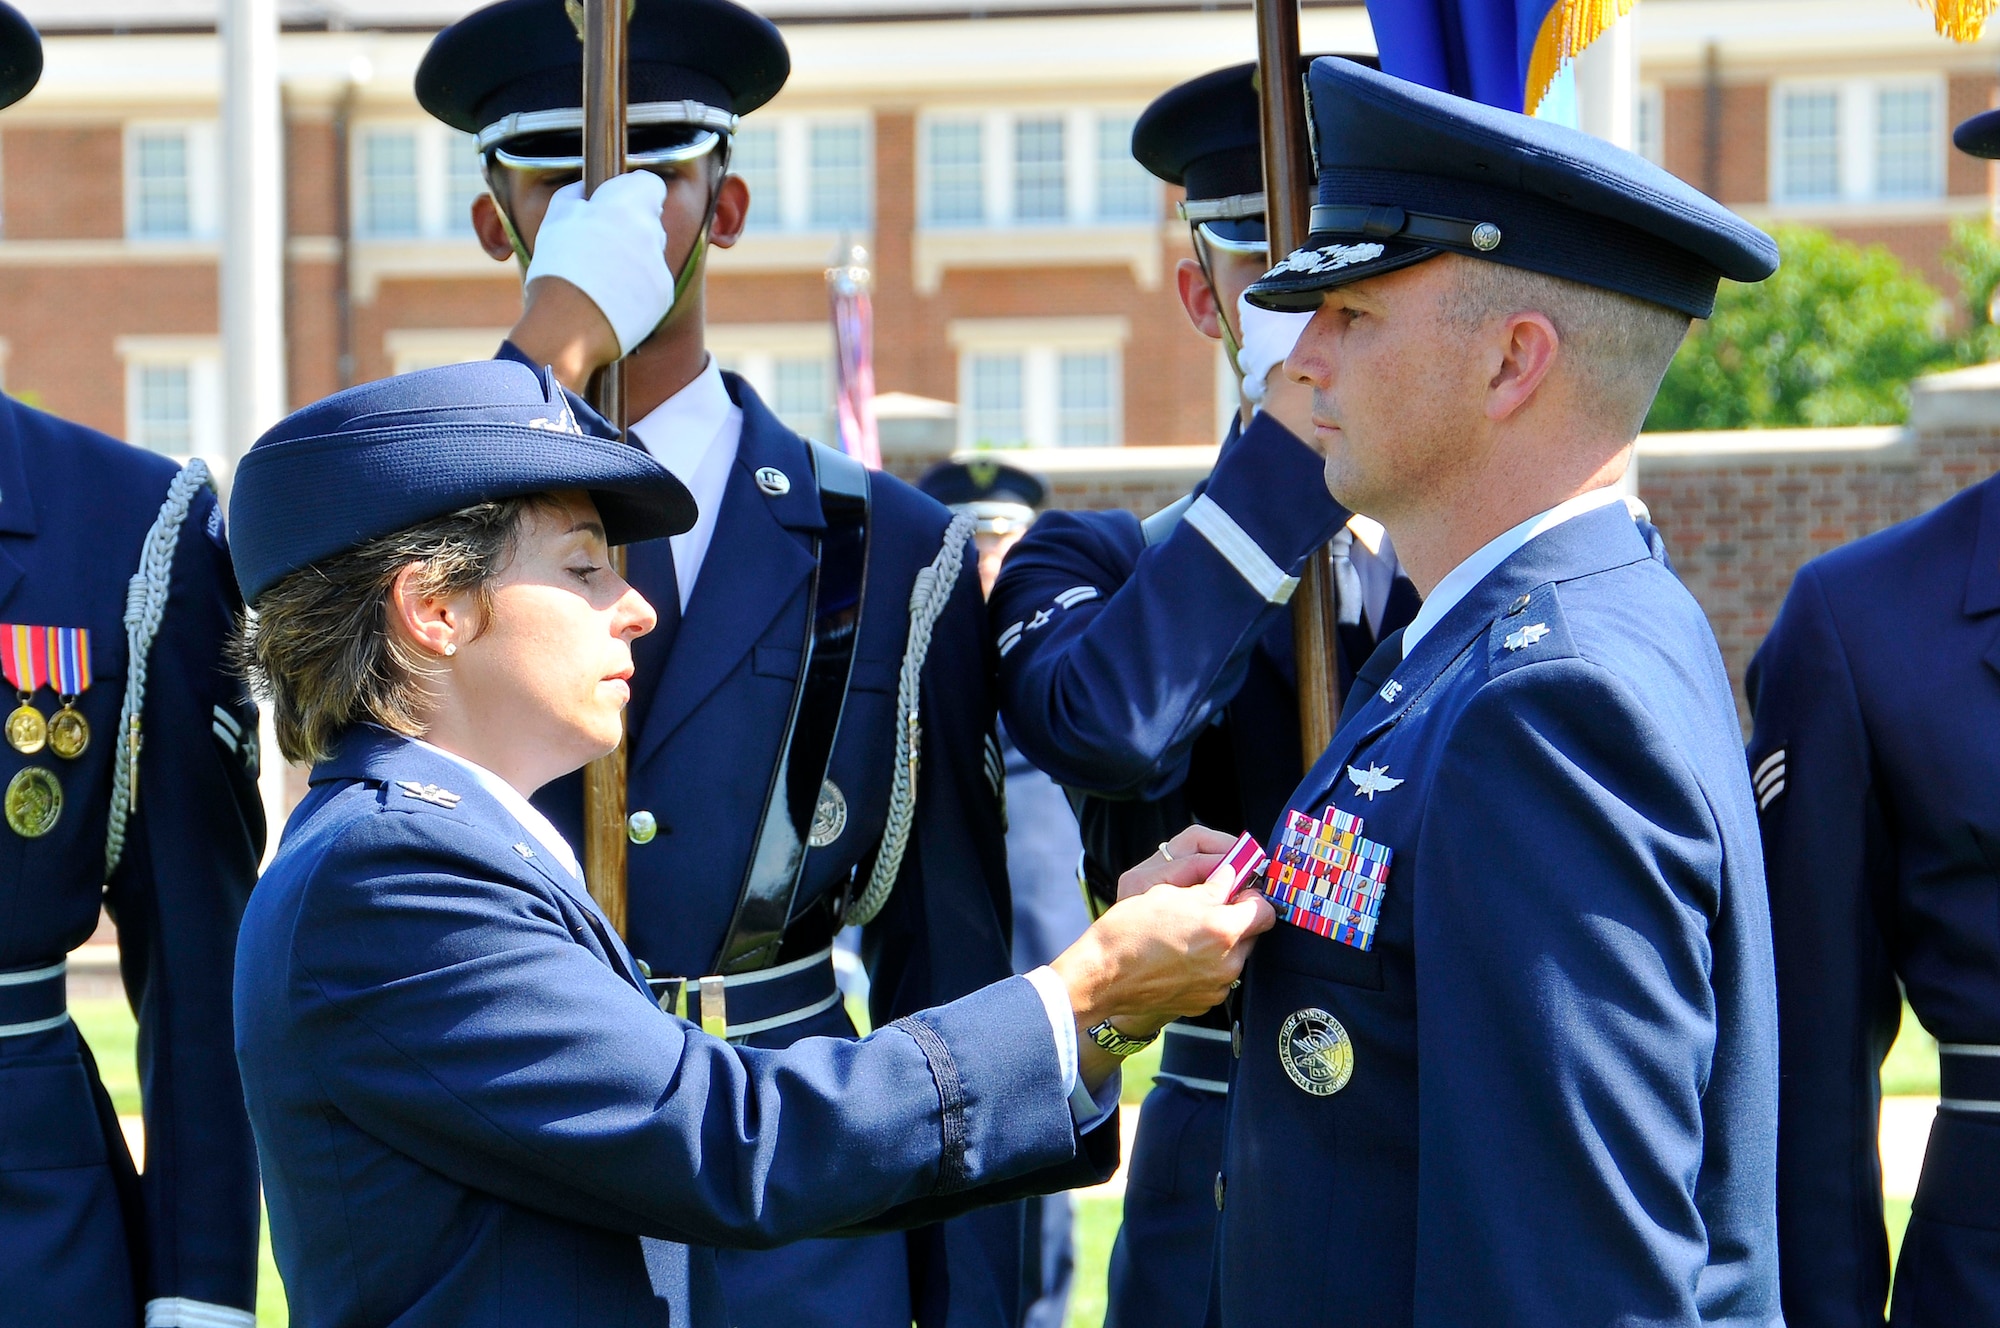 Col. Gina M. Humble, 11th Operations Group commander, presents the Meritorious Service Medal to Lt. Col. Raymond Powell, during a change of command ceremony July 12, at Joint Base Anacostia-Bolling, D.C. Humble lauded  Powell for his numerous accomplishments and achievements during his tenure as commander of the USAF Honor Guard.. (U.S. Air Force photo by Senior Airman Steele C. G. Britton)